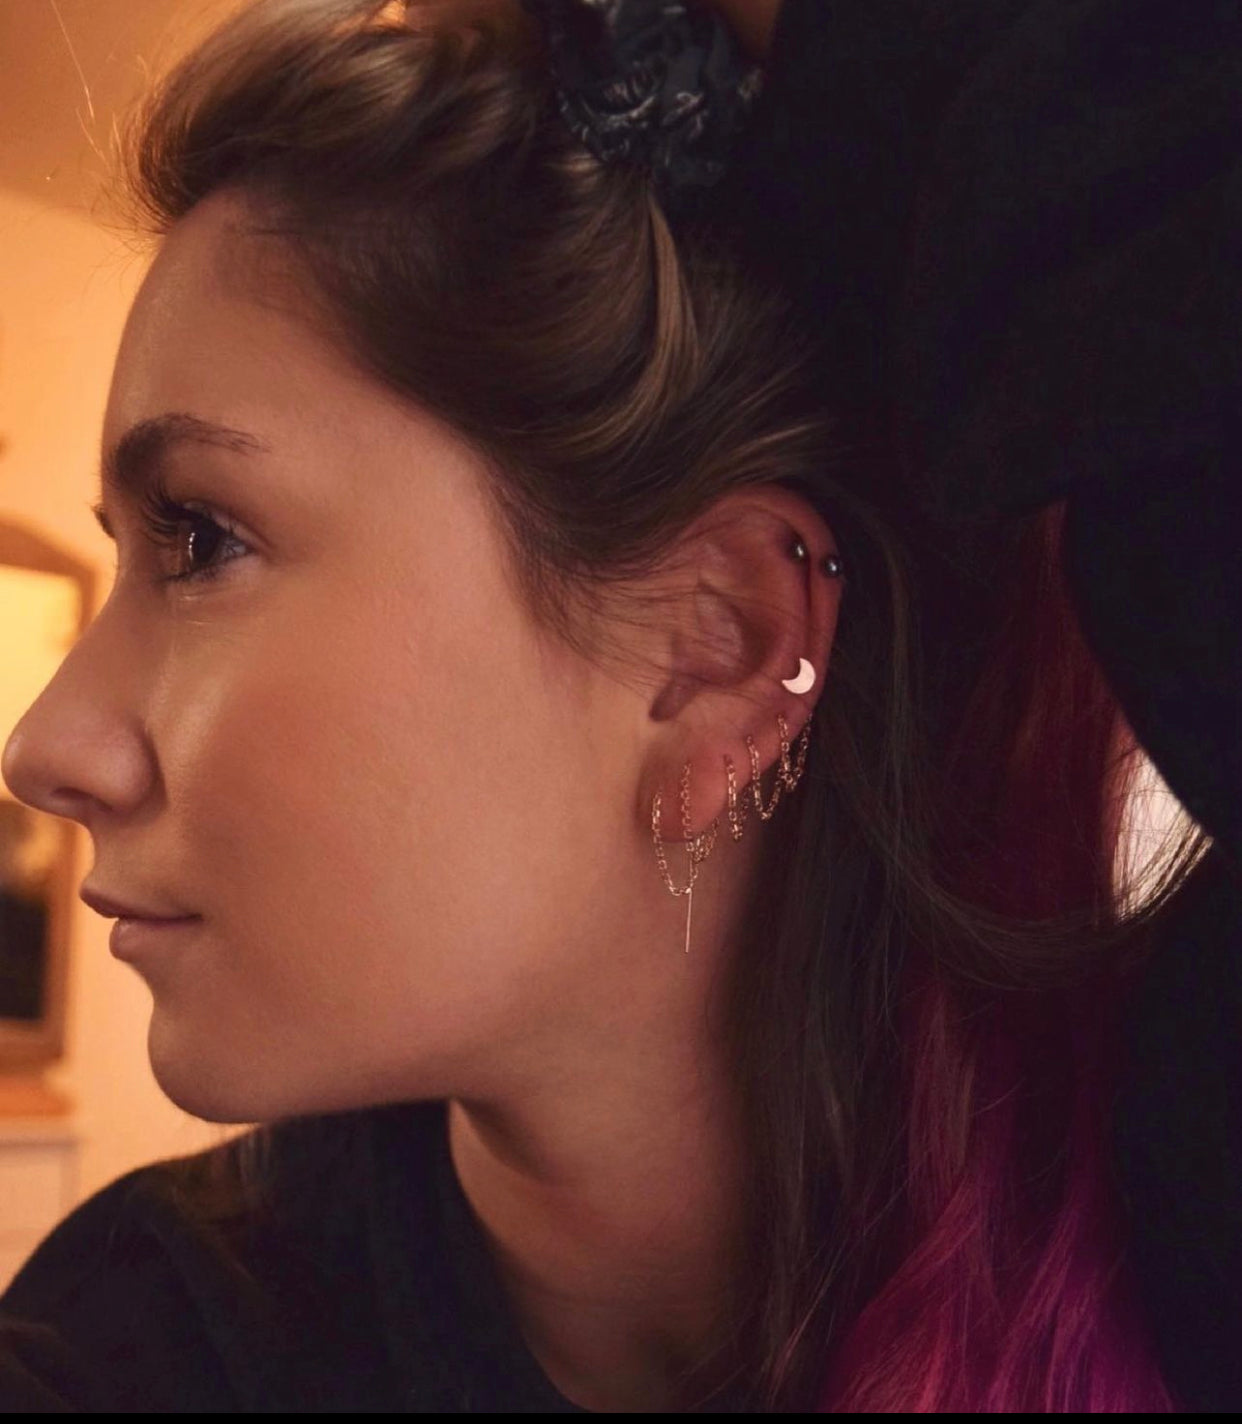 Made-to-Order 14k Solid Rose Gold Crescent Moon Ear Threaders